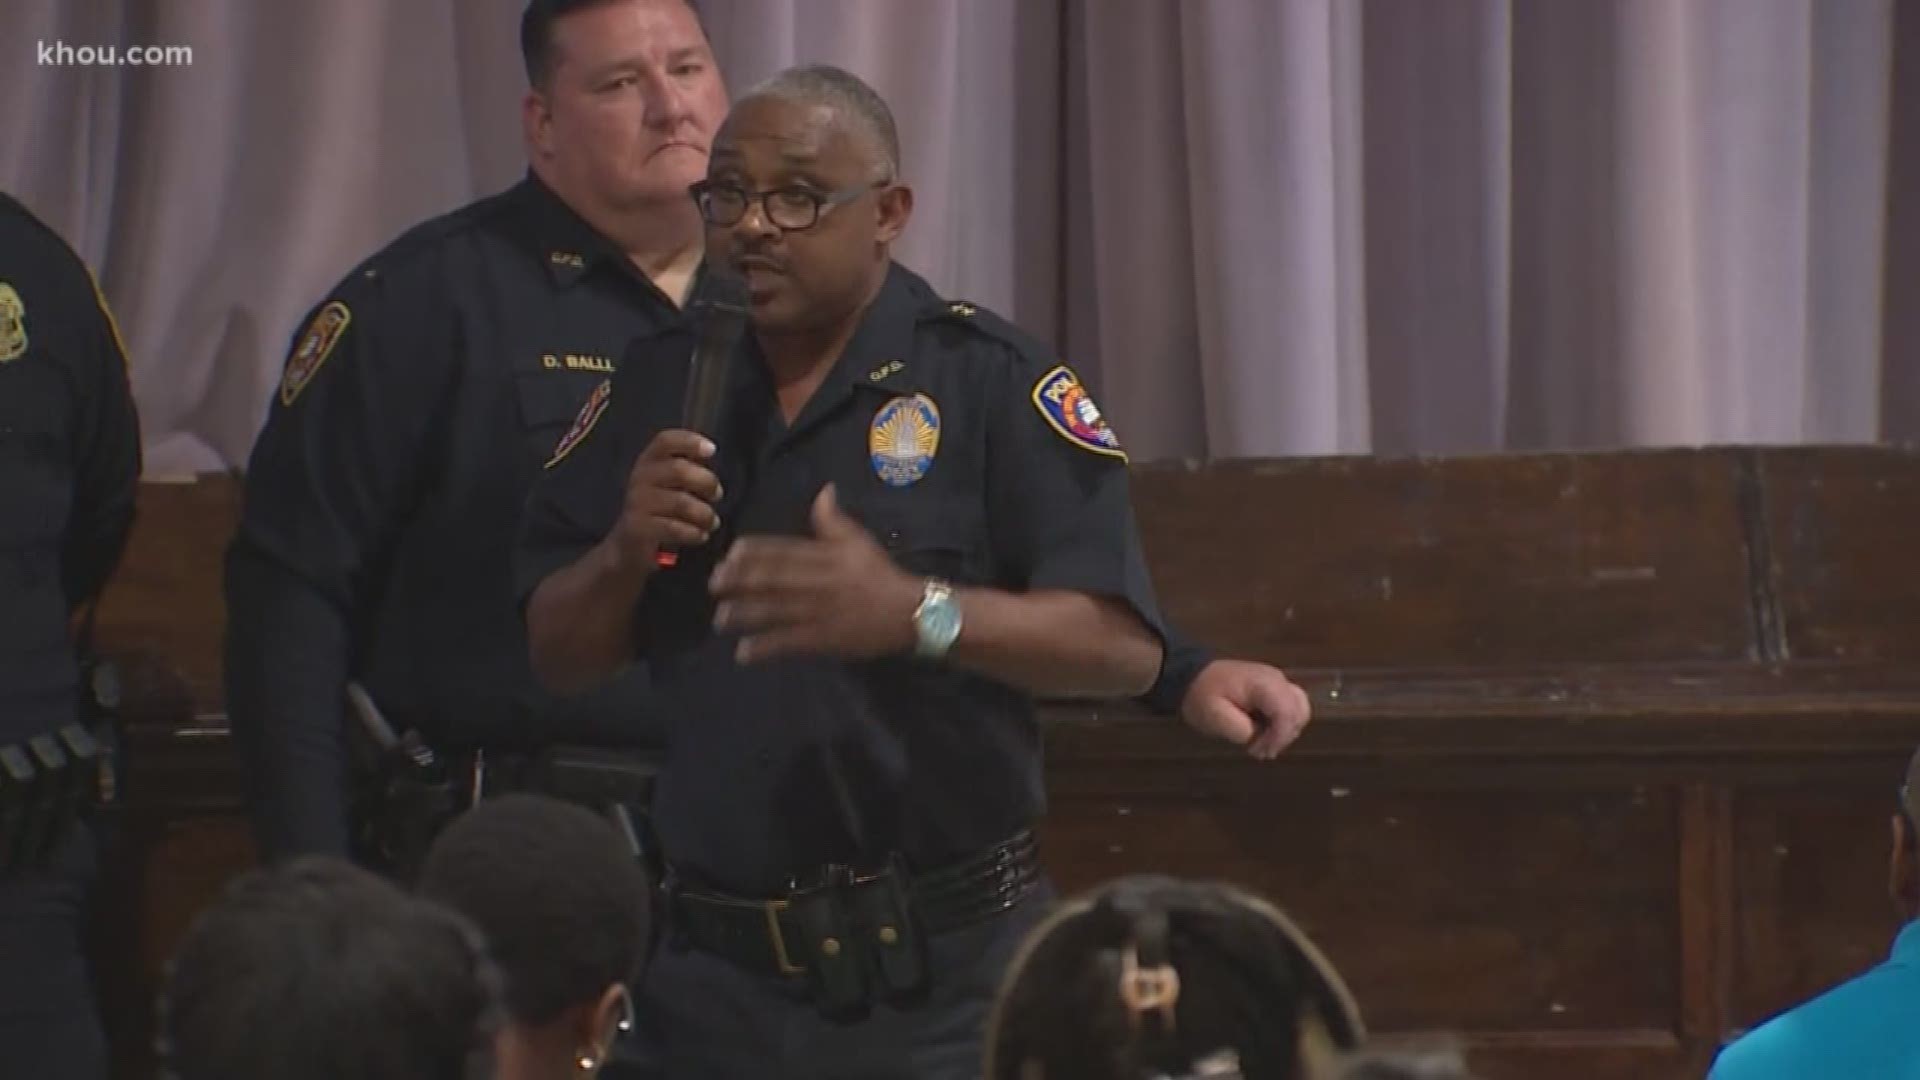 Galveston Police Chief Vernon Hale held a community meeting Tuesday evening. He told the crowd of about 200 community members the officers are still on the job.